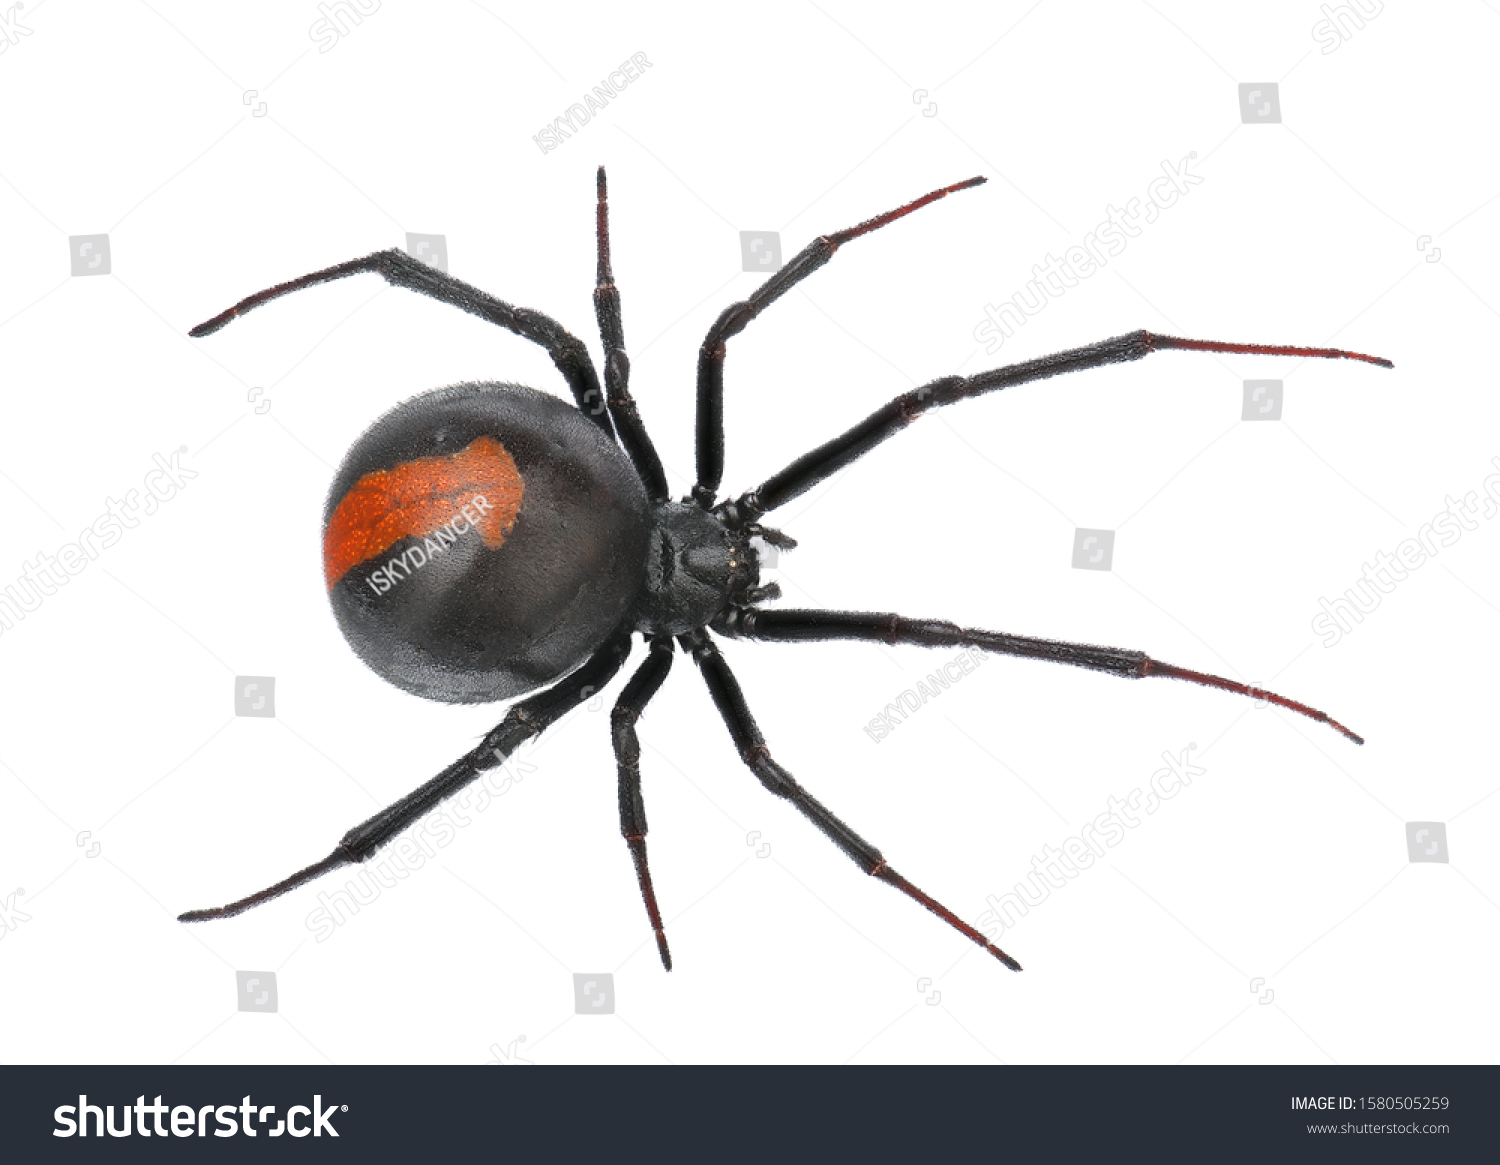 Deep focus of Black Widow Spider / red back spider isolated on White Background #1580505259